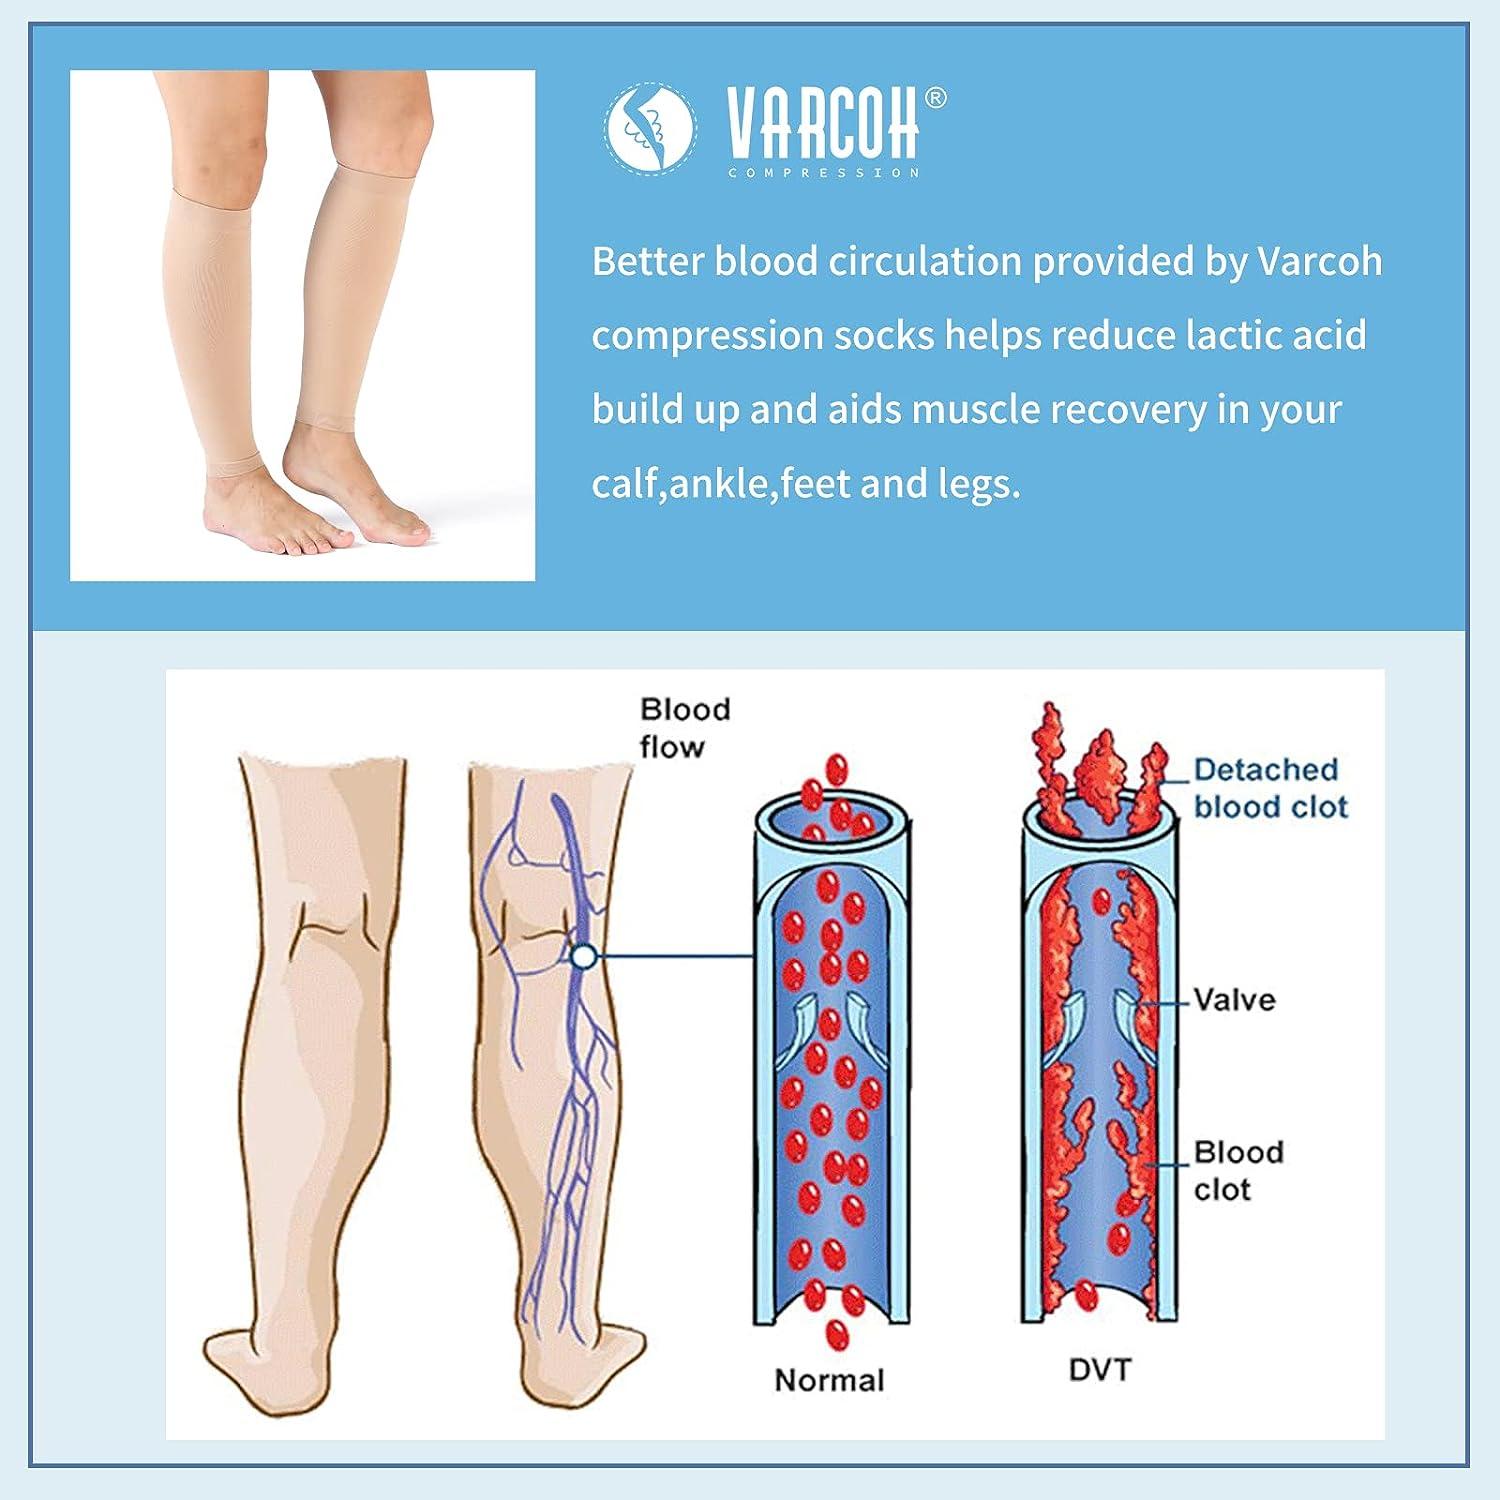 VARCOH Compression Socks For Women & Men,(2 Pairs)Calf Compression Sleeves  20-30mm Hg Firm Support Graduated Varicose Veins Hosiery,Indicated for  swelling, pregnancy, recovery, exercise, cycling Large Beige